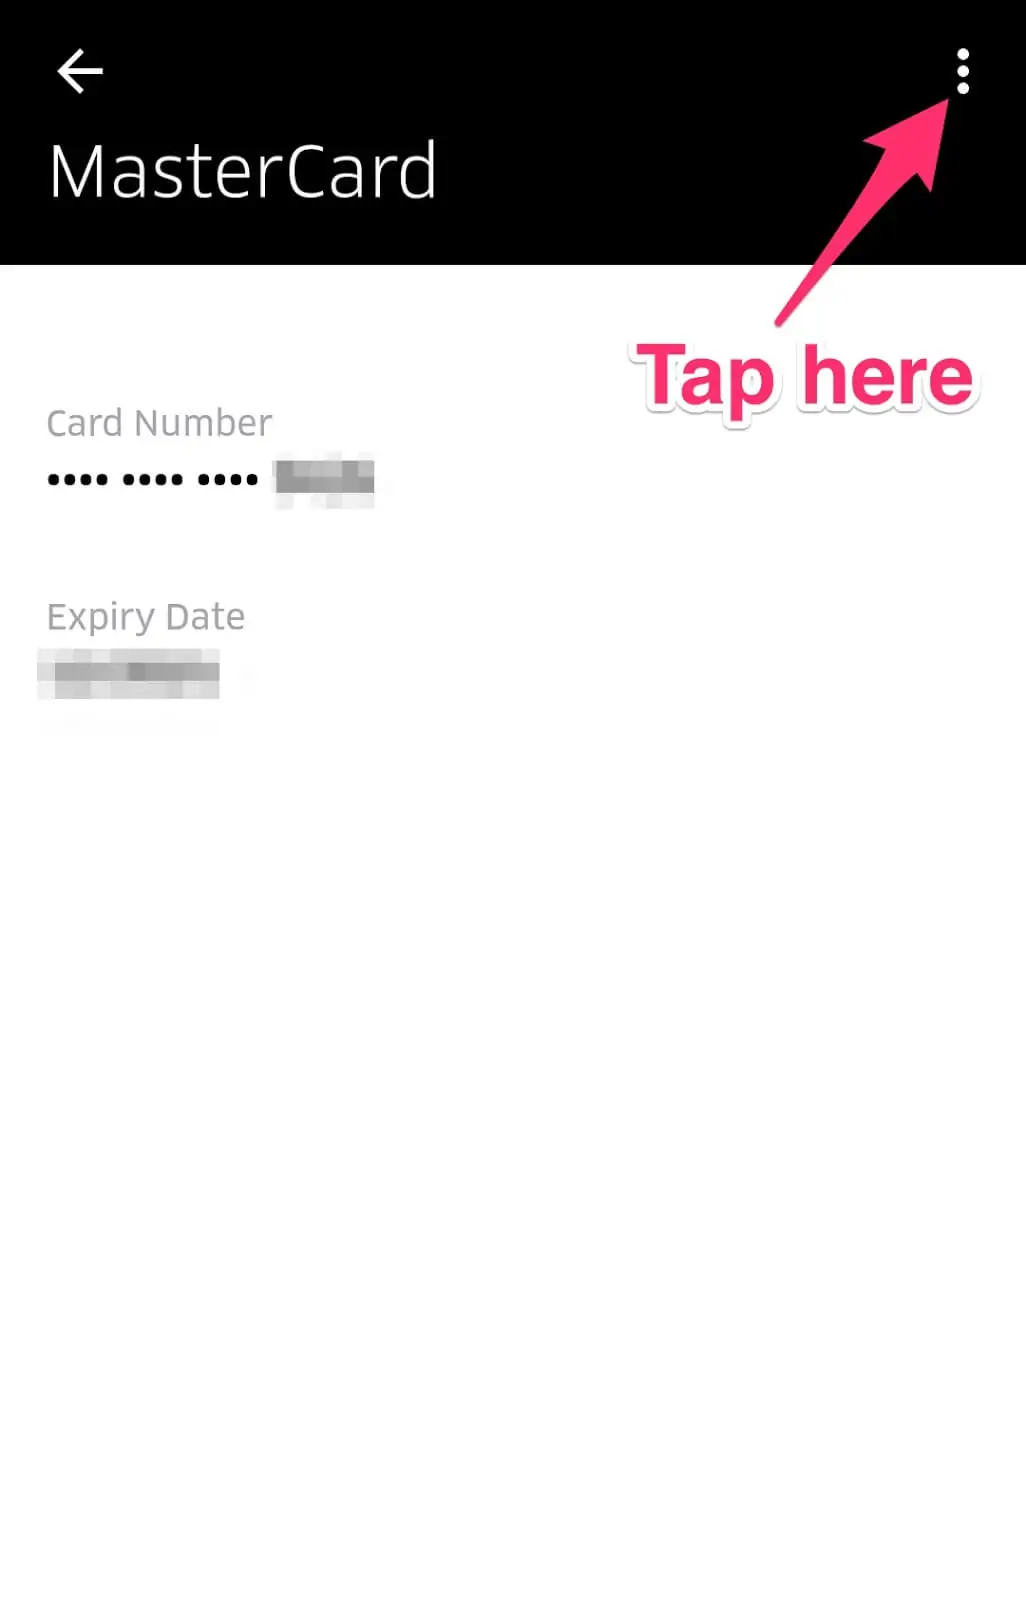 How to Remove Your Credit Card from Uber: tap dots to edit payment info